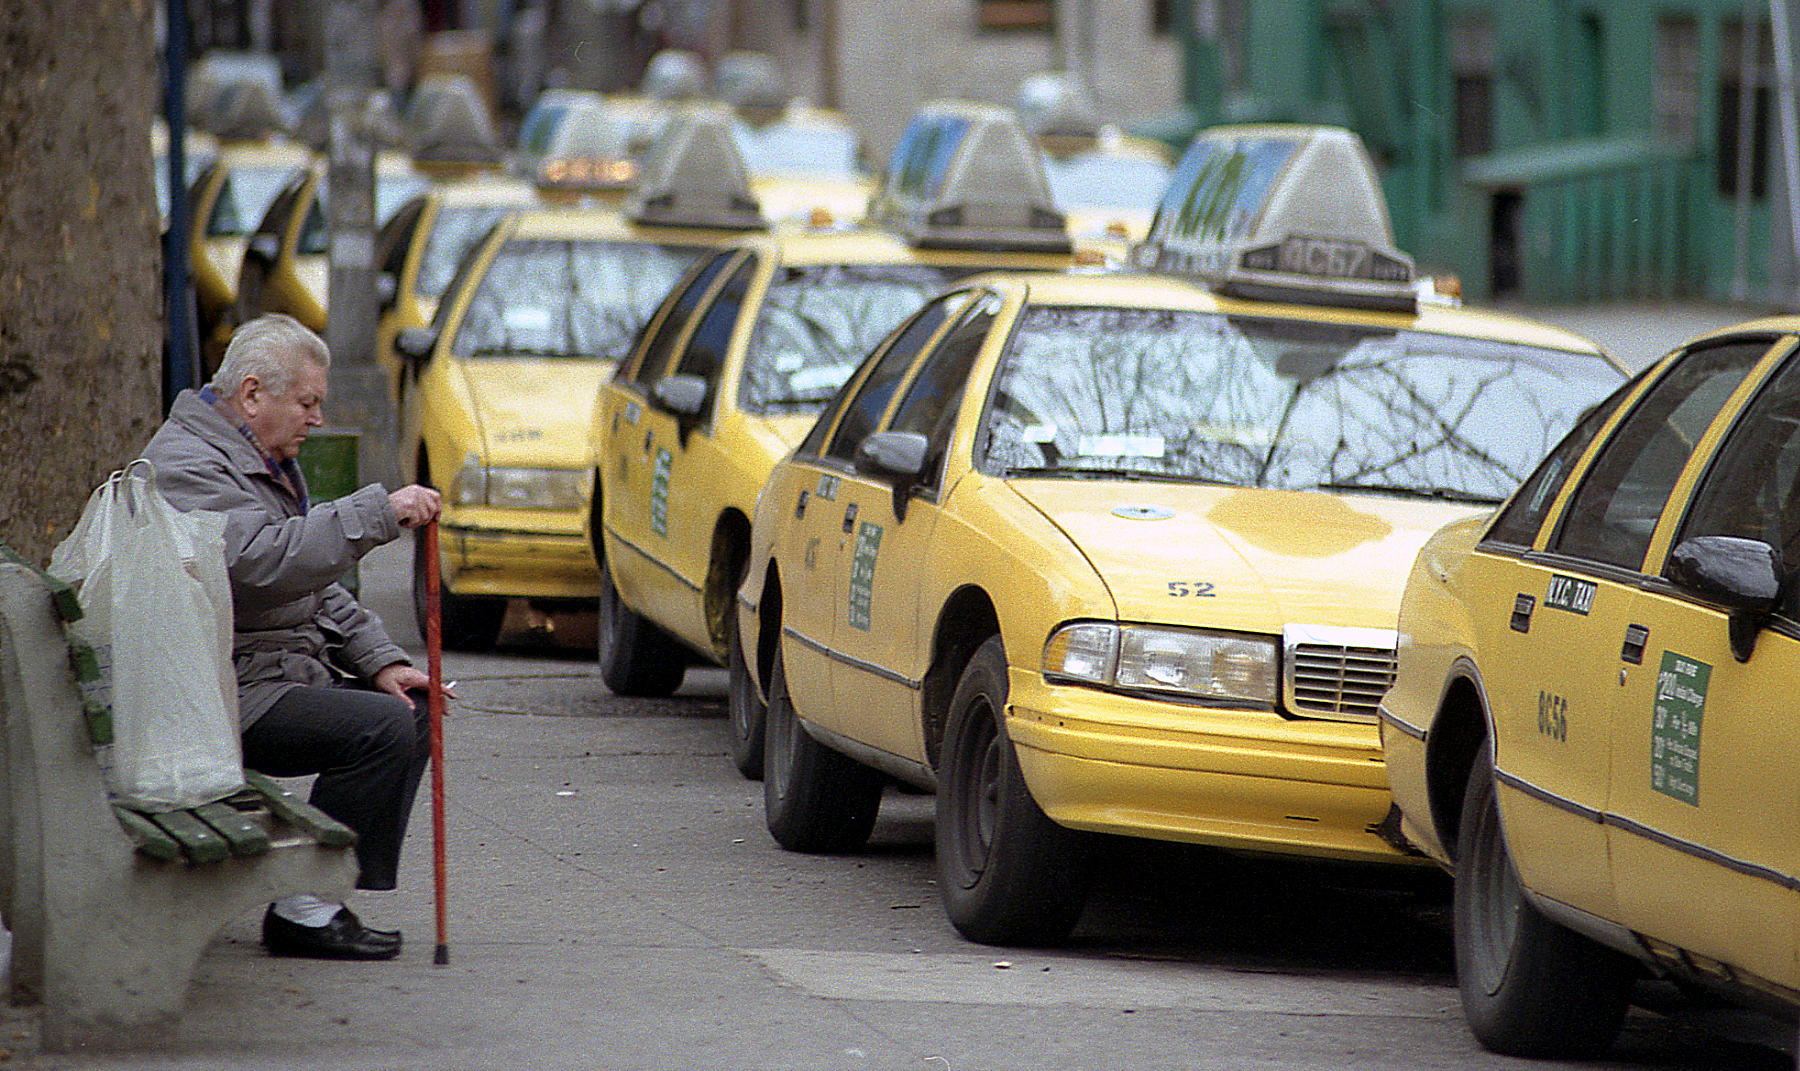 New York man and cabs